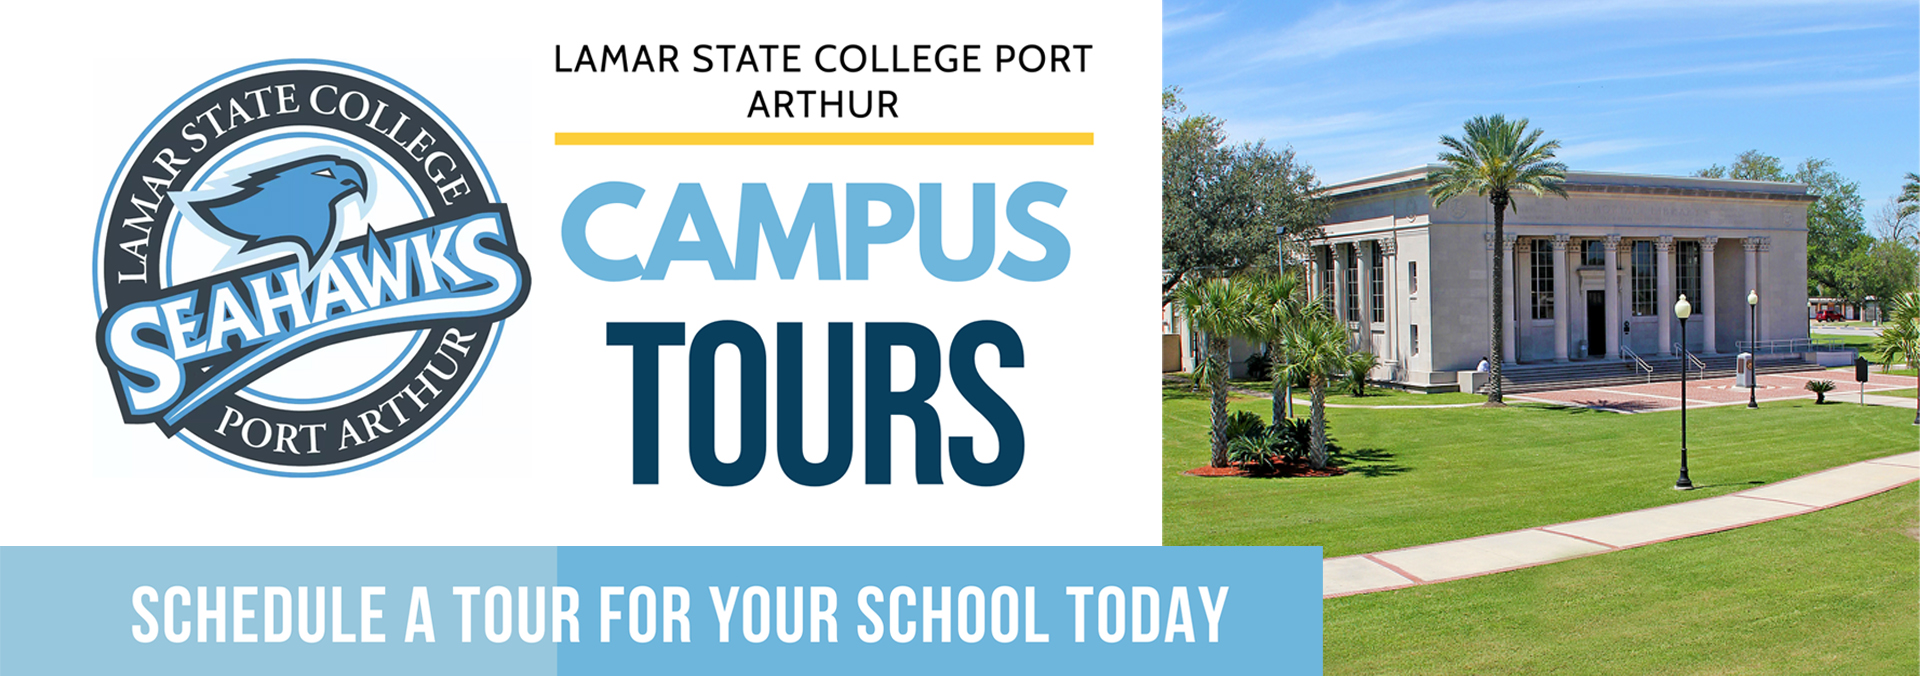 LSCPA Campus Tours